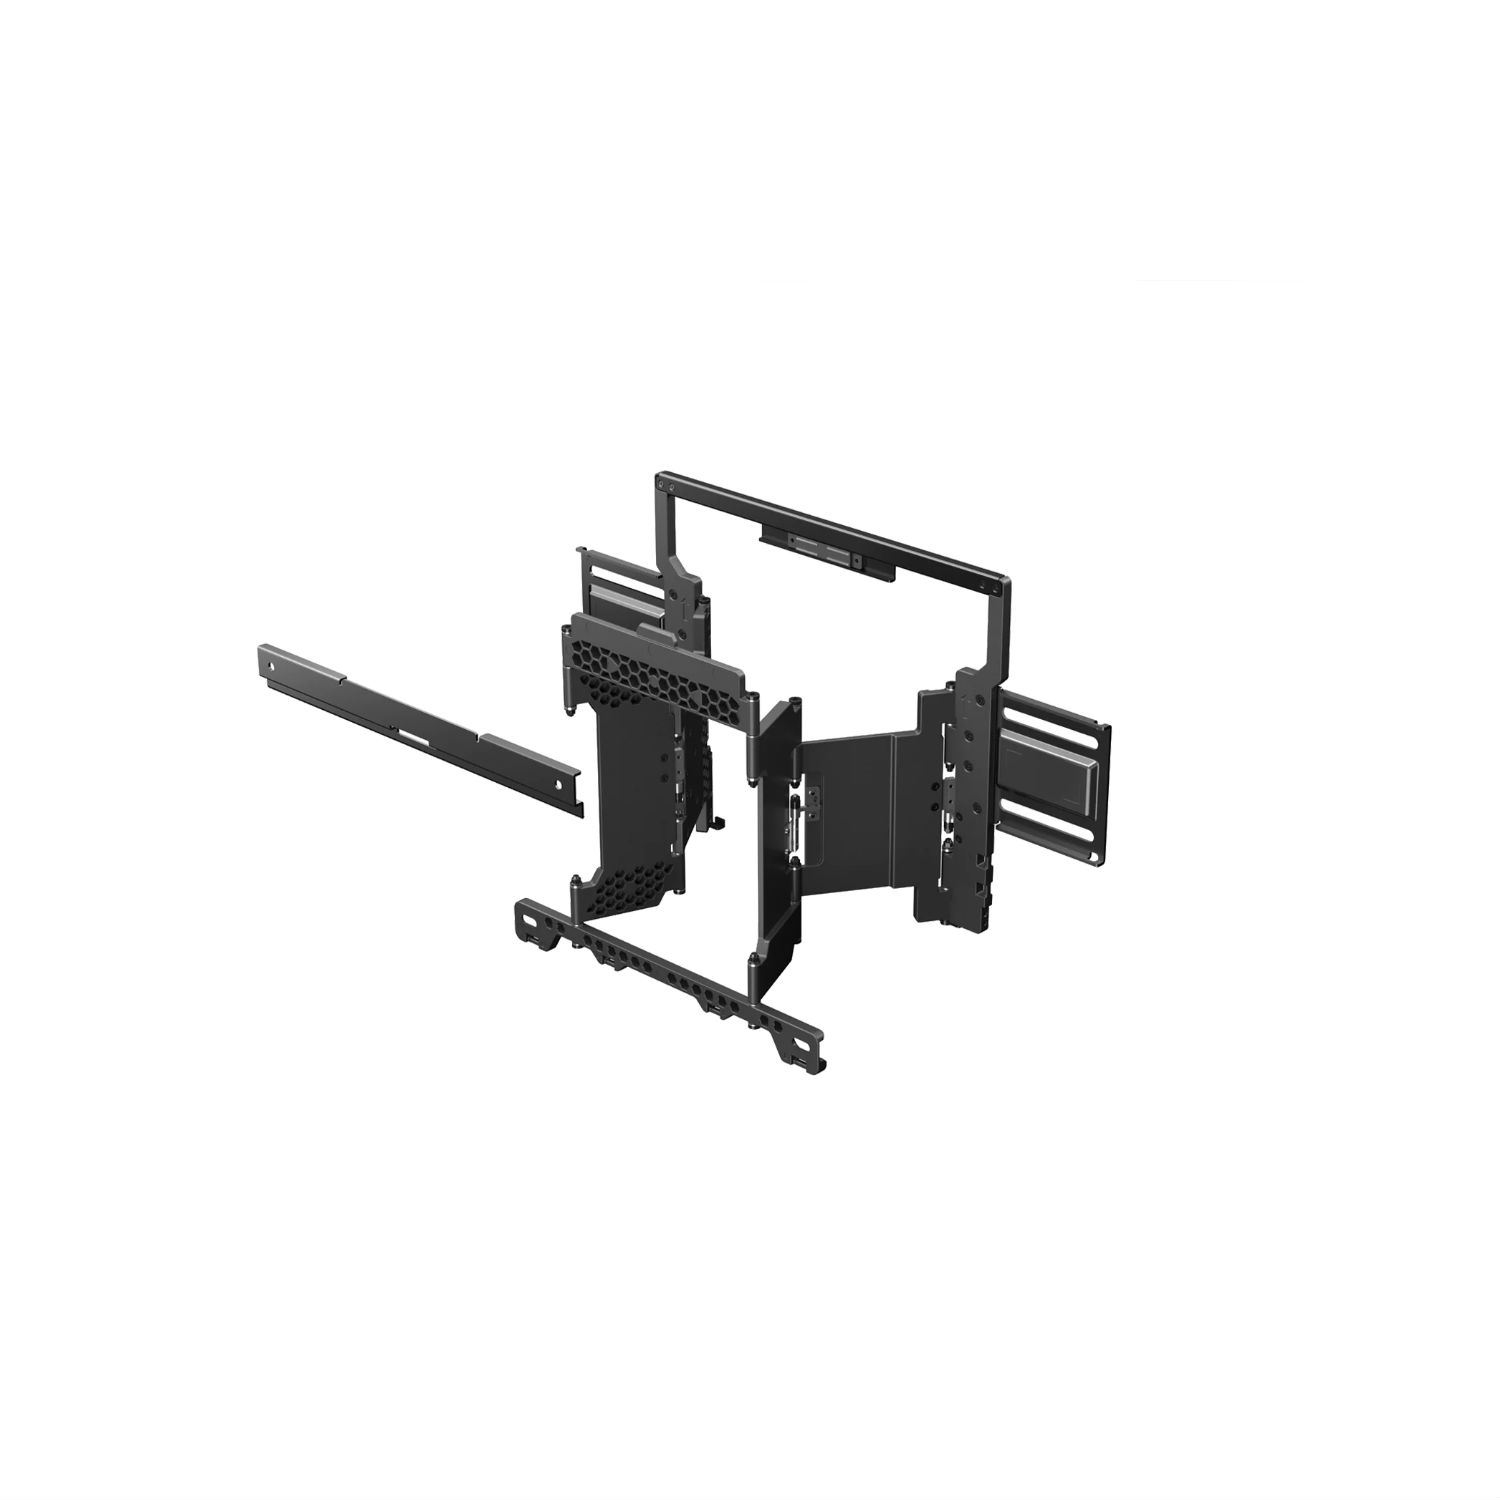 Sony SUWL850 Wall Mount Bracket For Sony Bravia TVs - with swivel function and easy access to connections - Black - 0